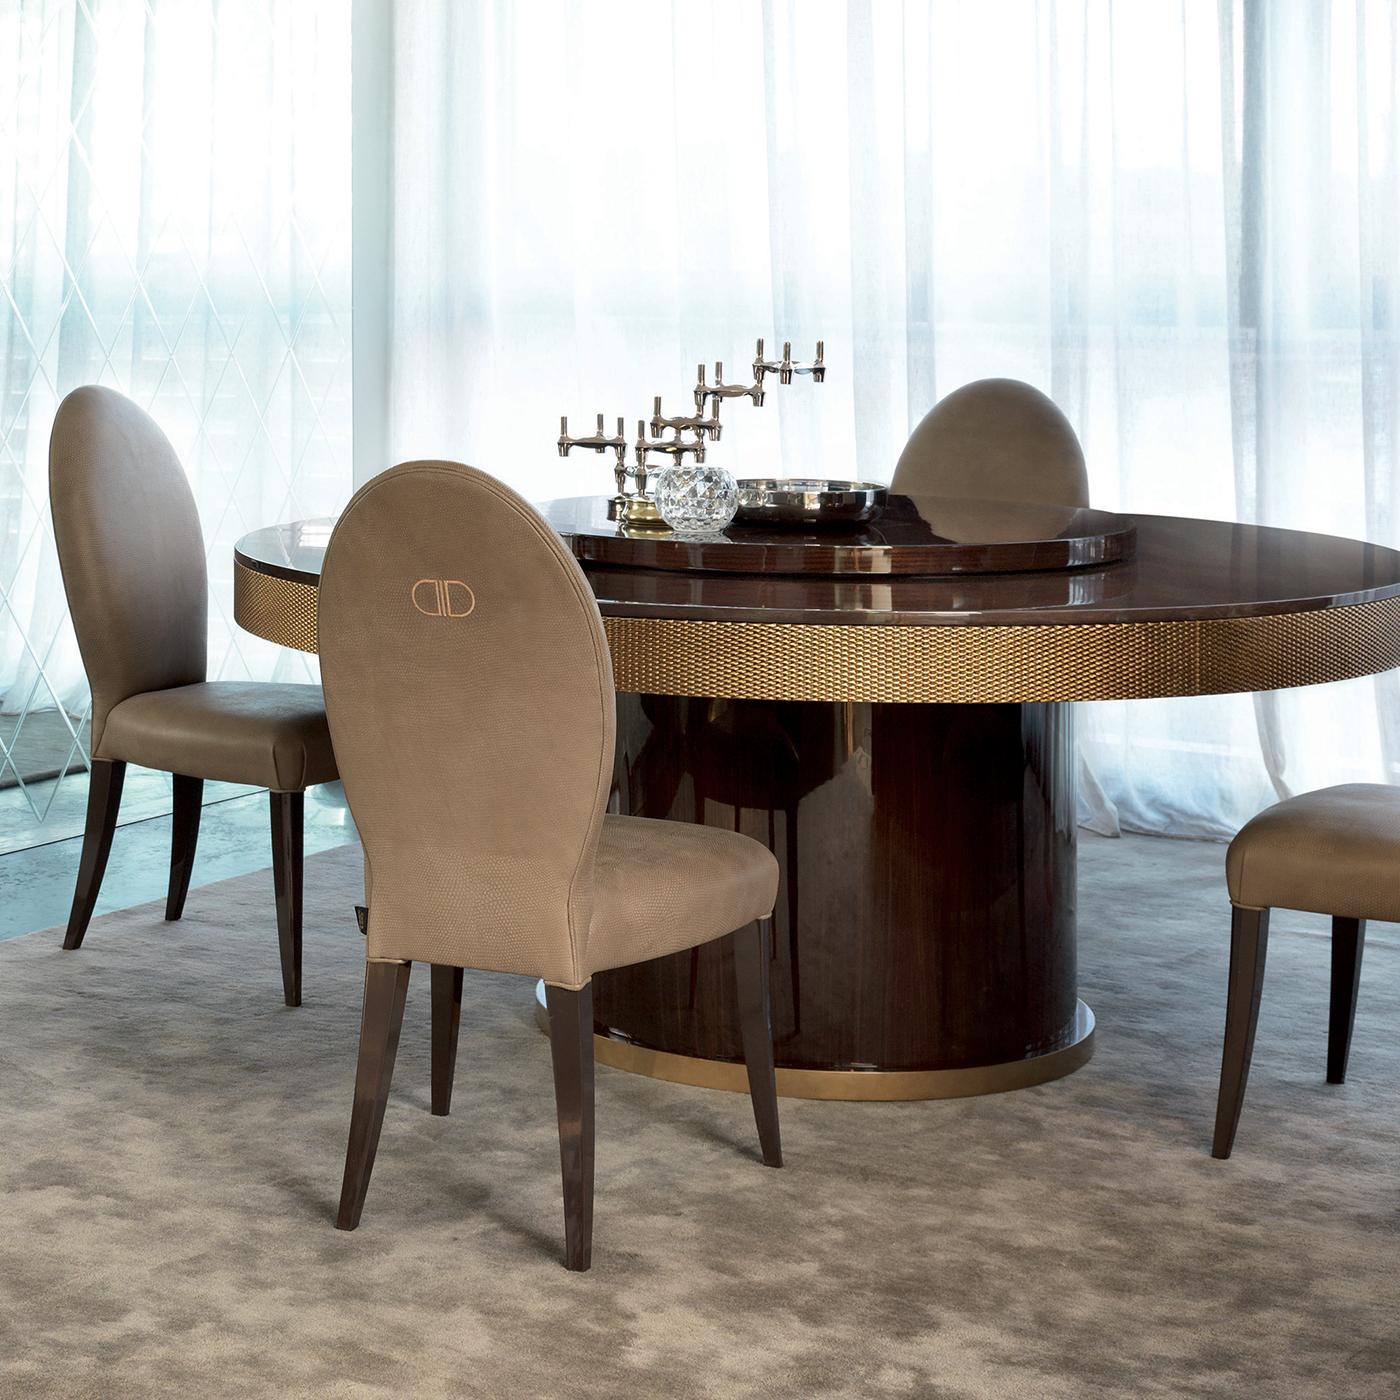 This majestic, sculptural dining table will bring an elegant and distinctive character both in a Classic and contemporary decor. It features a plywood top with dark walnut veneer and brushed gloss finish, with a Lazy Susan element at its center and